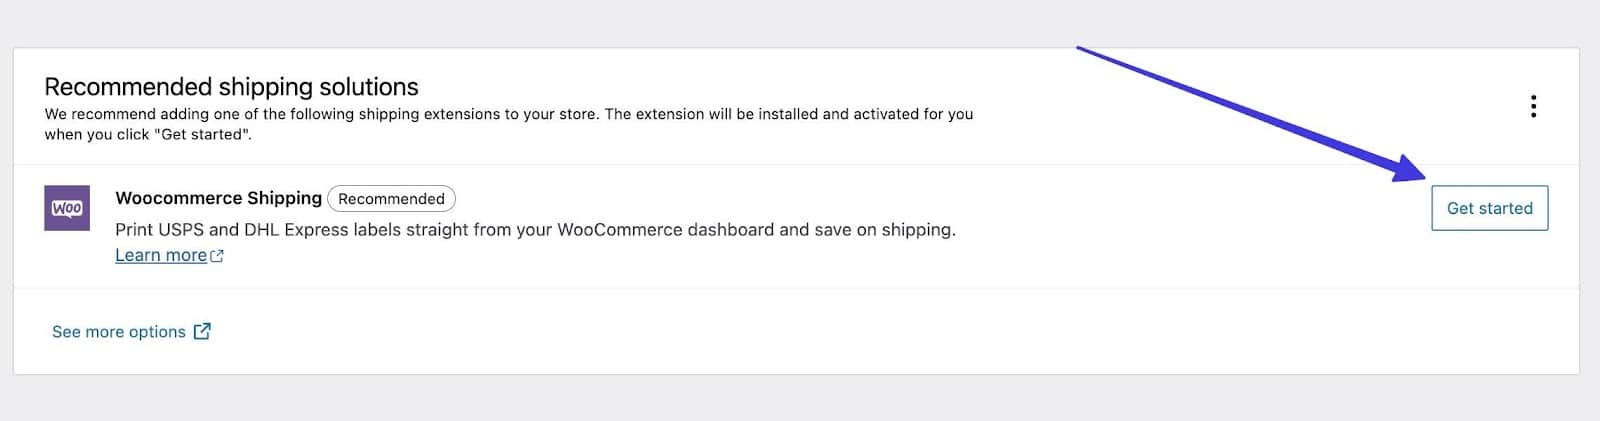 Get started with WooCommerce Shipping.